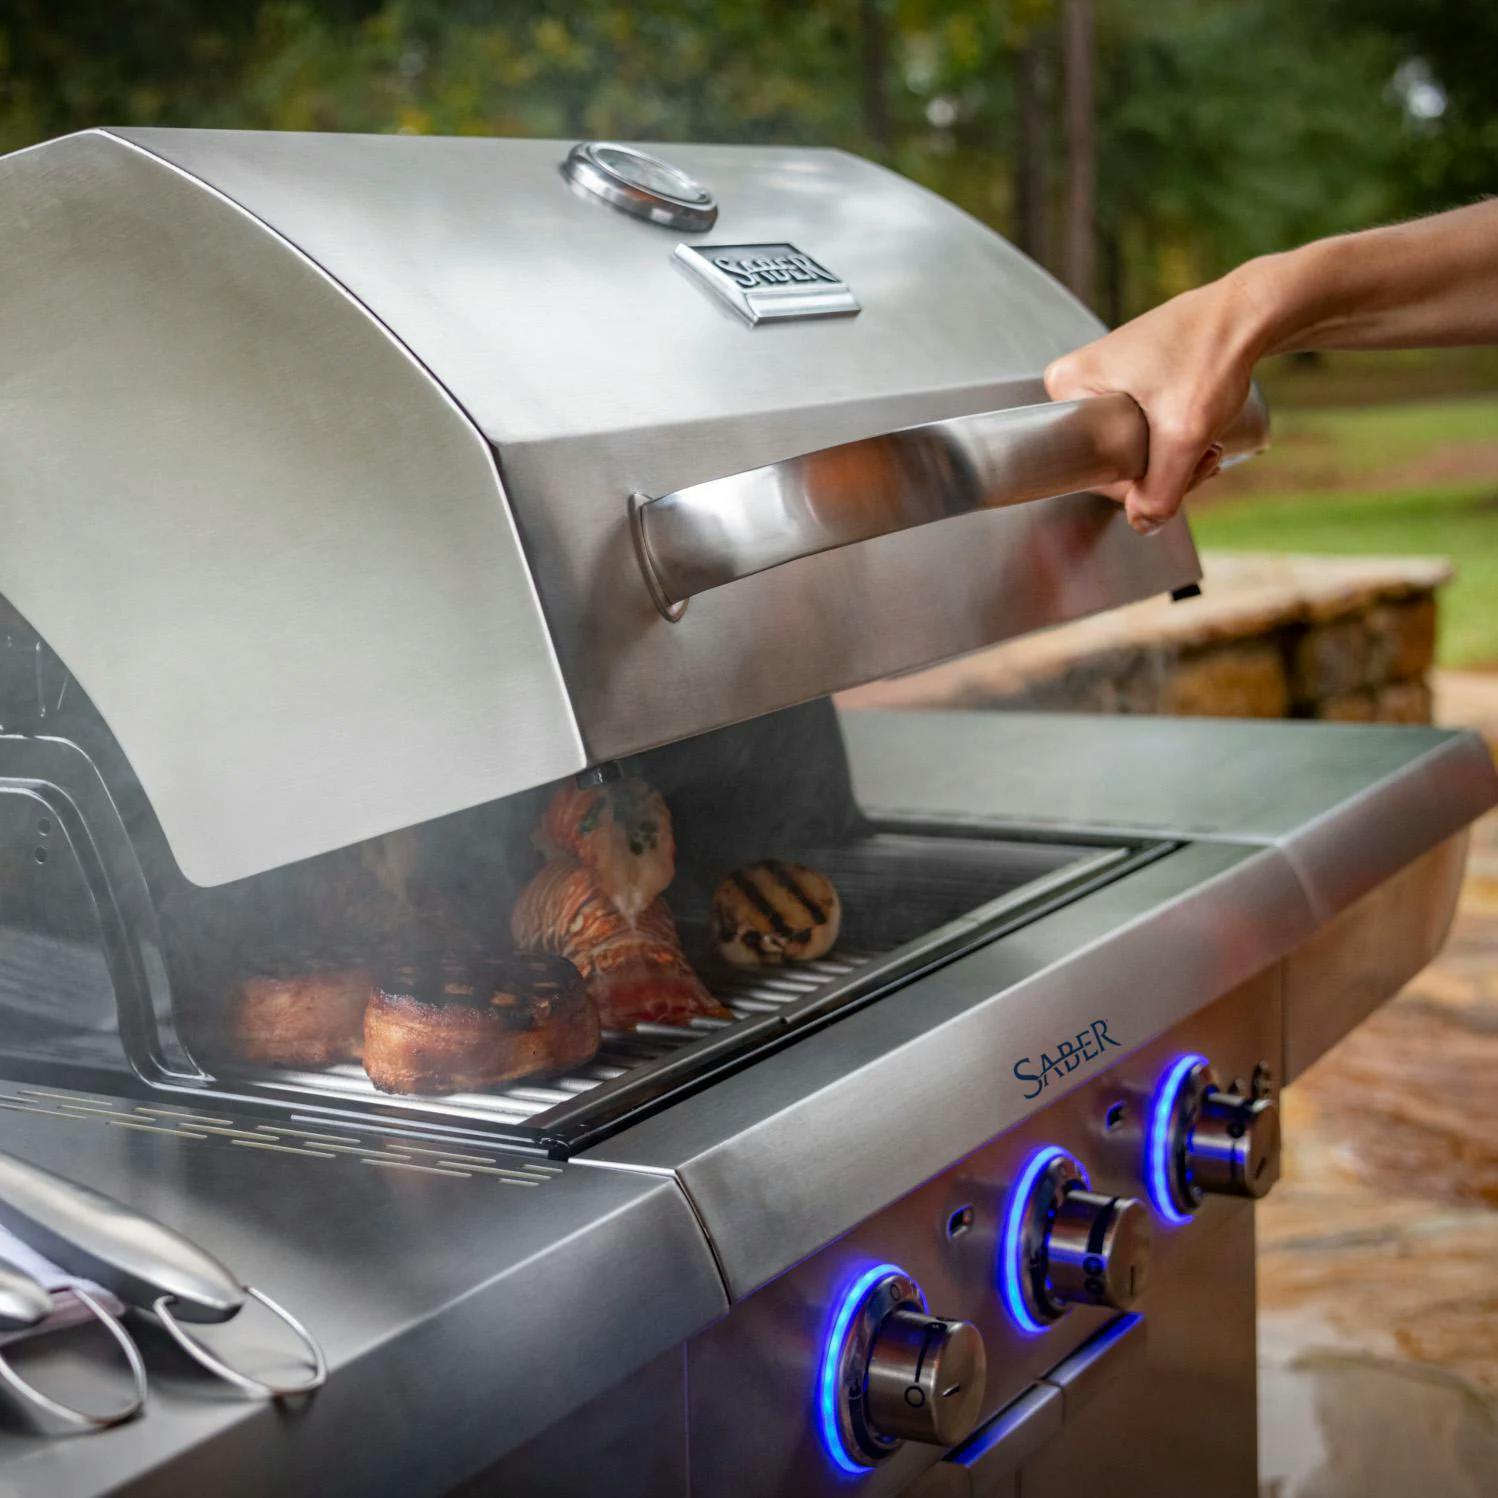 Saber Select 3-Burner Infrared Gas Grill · 24 in. · Propane